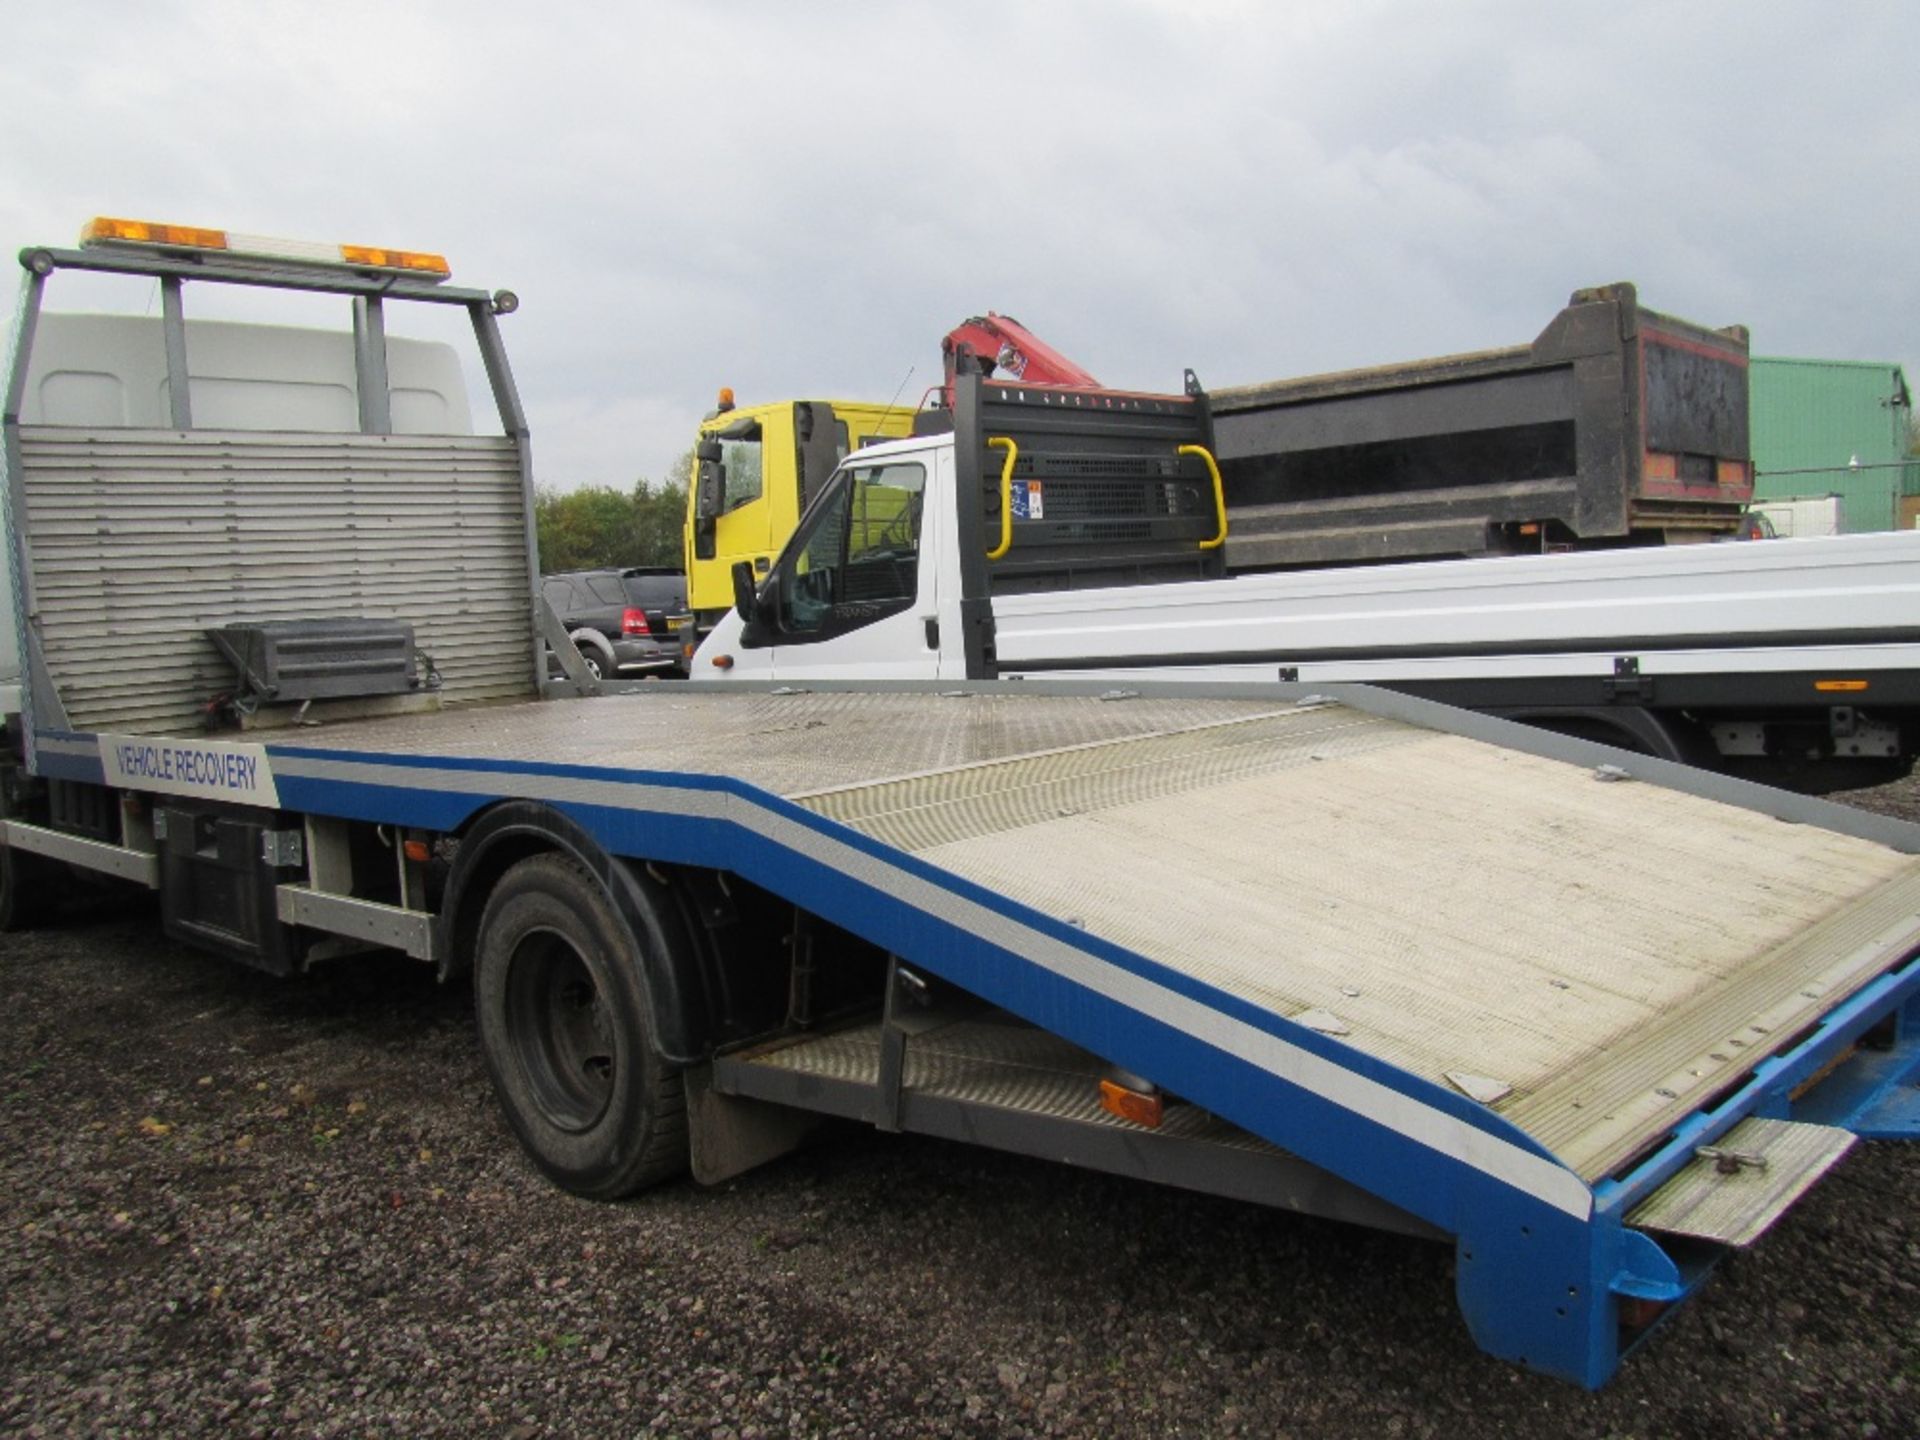 2006 Renault Midlum 180 22ft Plant Beavertail with Sleeper Cab, Alloy Ramps, Winch. Reg Docs will be - Image 5 of 6